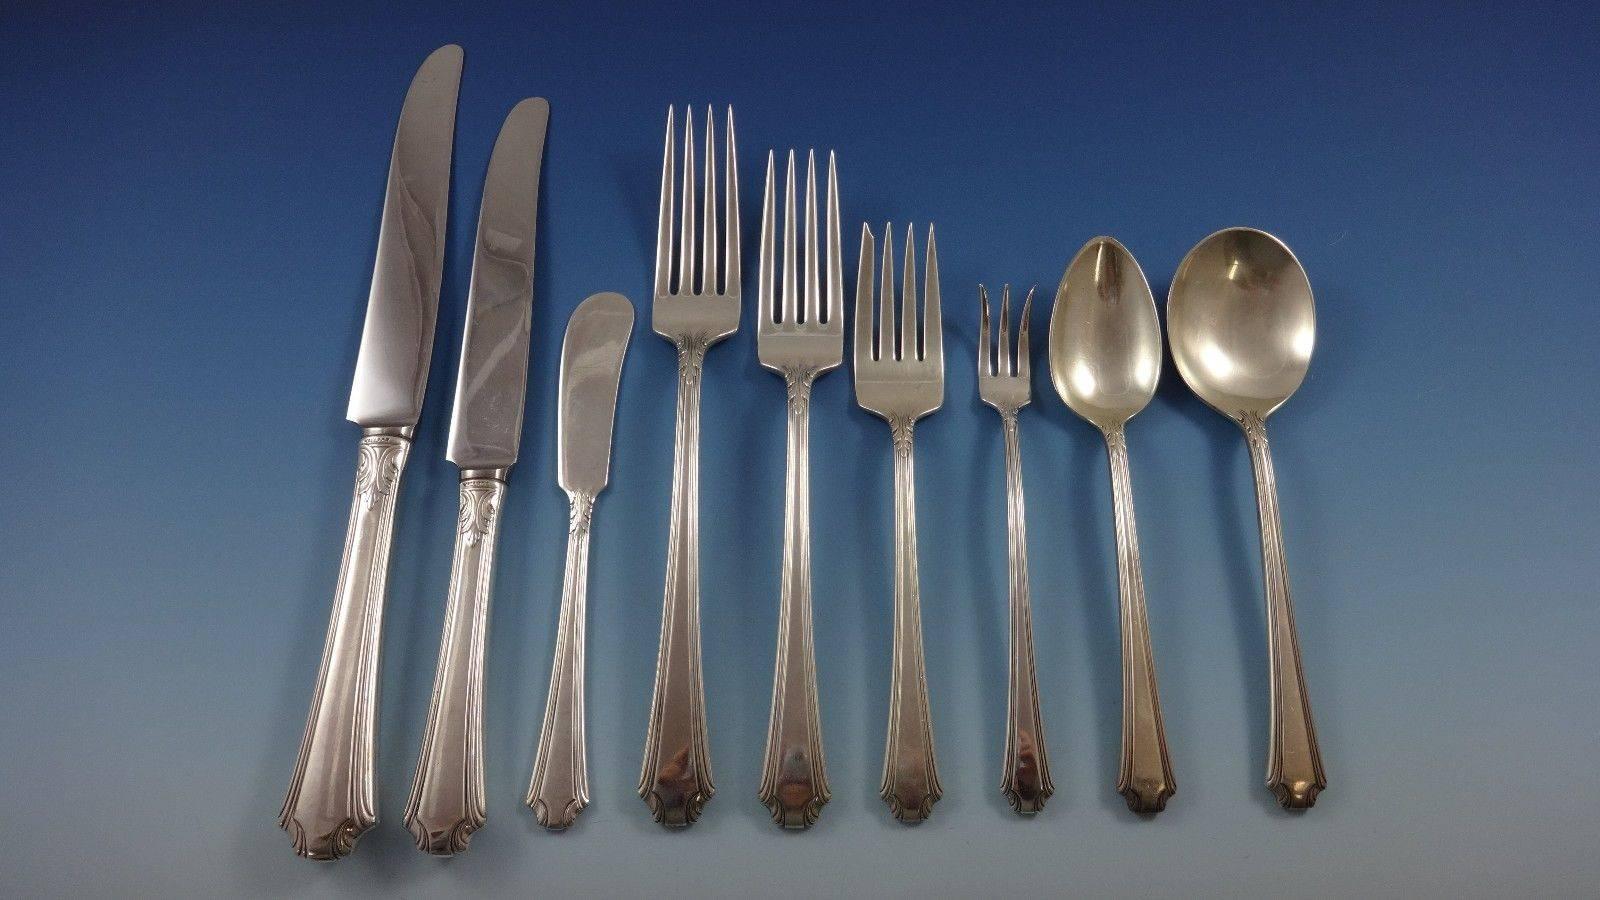 Large Georgian Colonial by Wallace sterling silver dinner and lunch size flatware set of 108 pieces. This set includes:

12 dinner size knives, 9 5/8